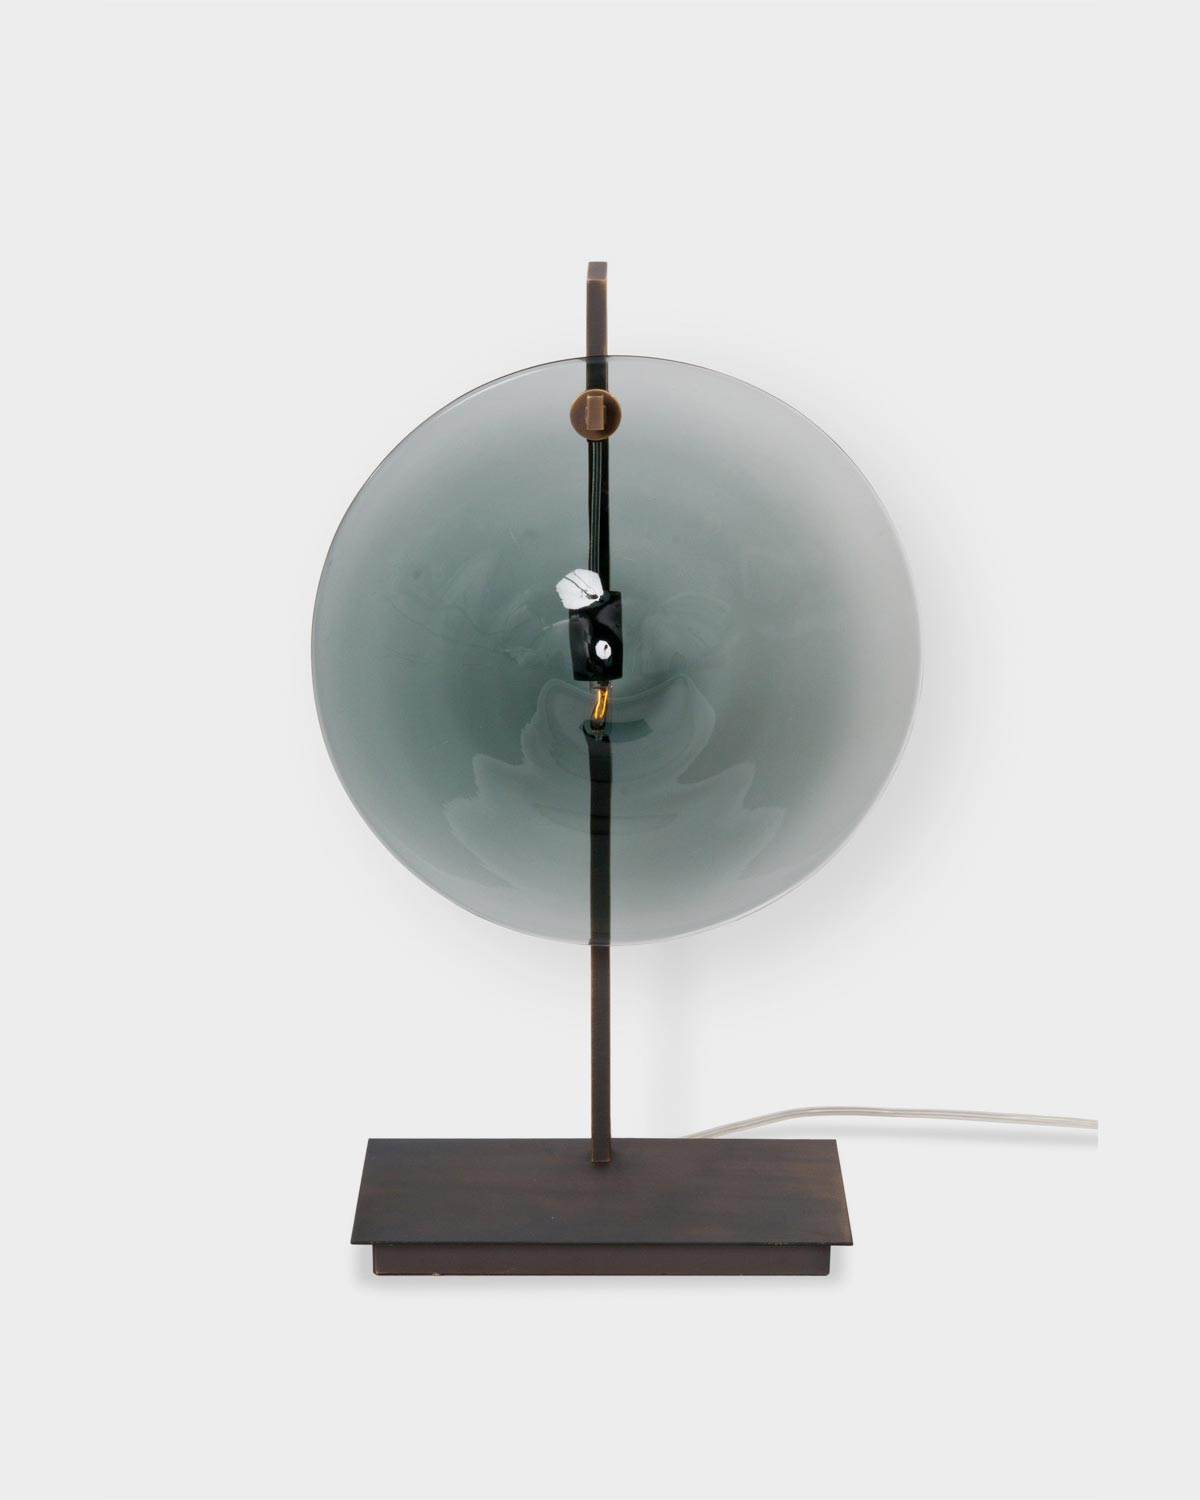 The Orbe Table Lamp by Veronese